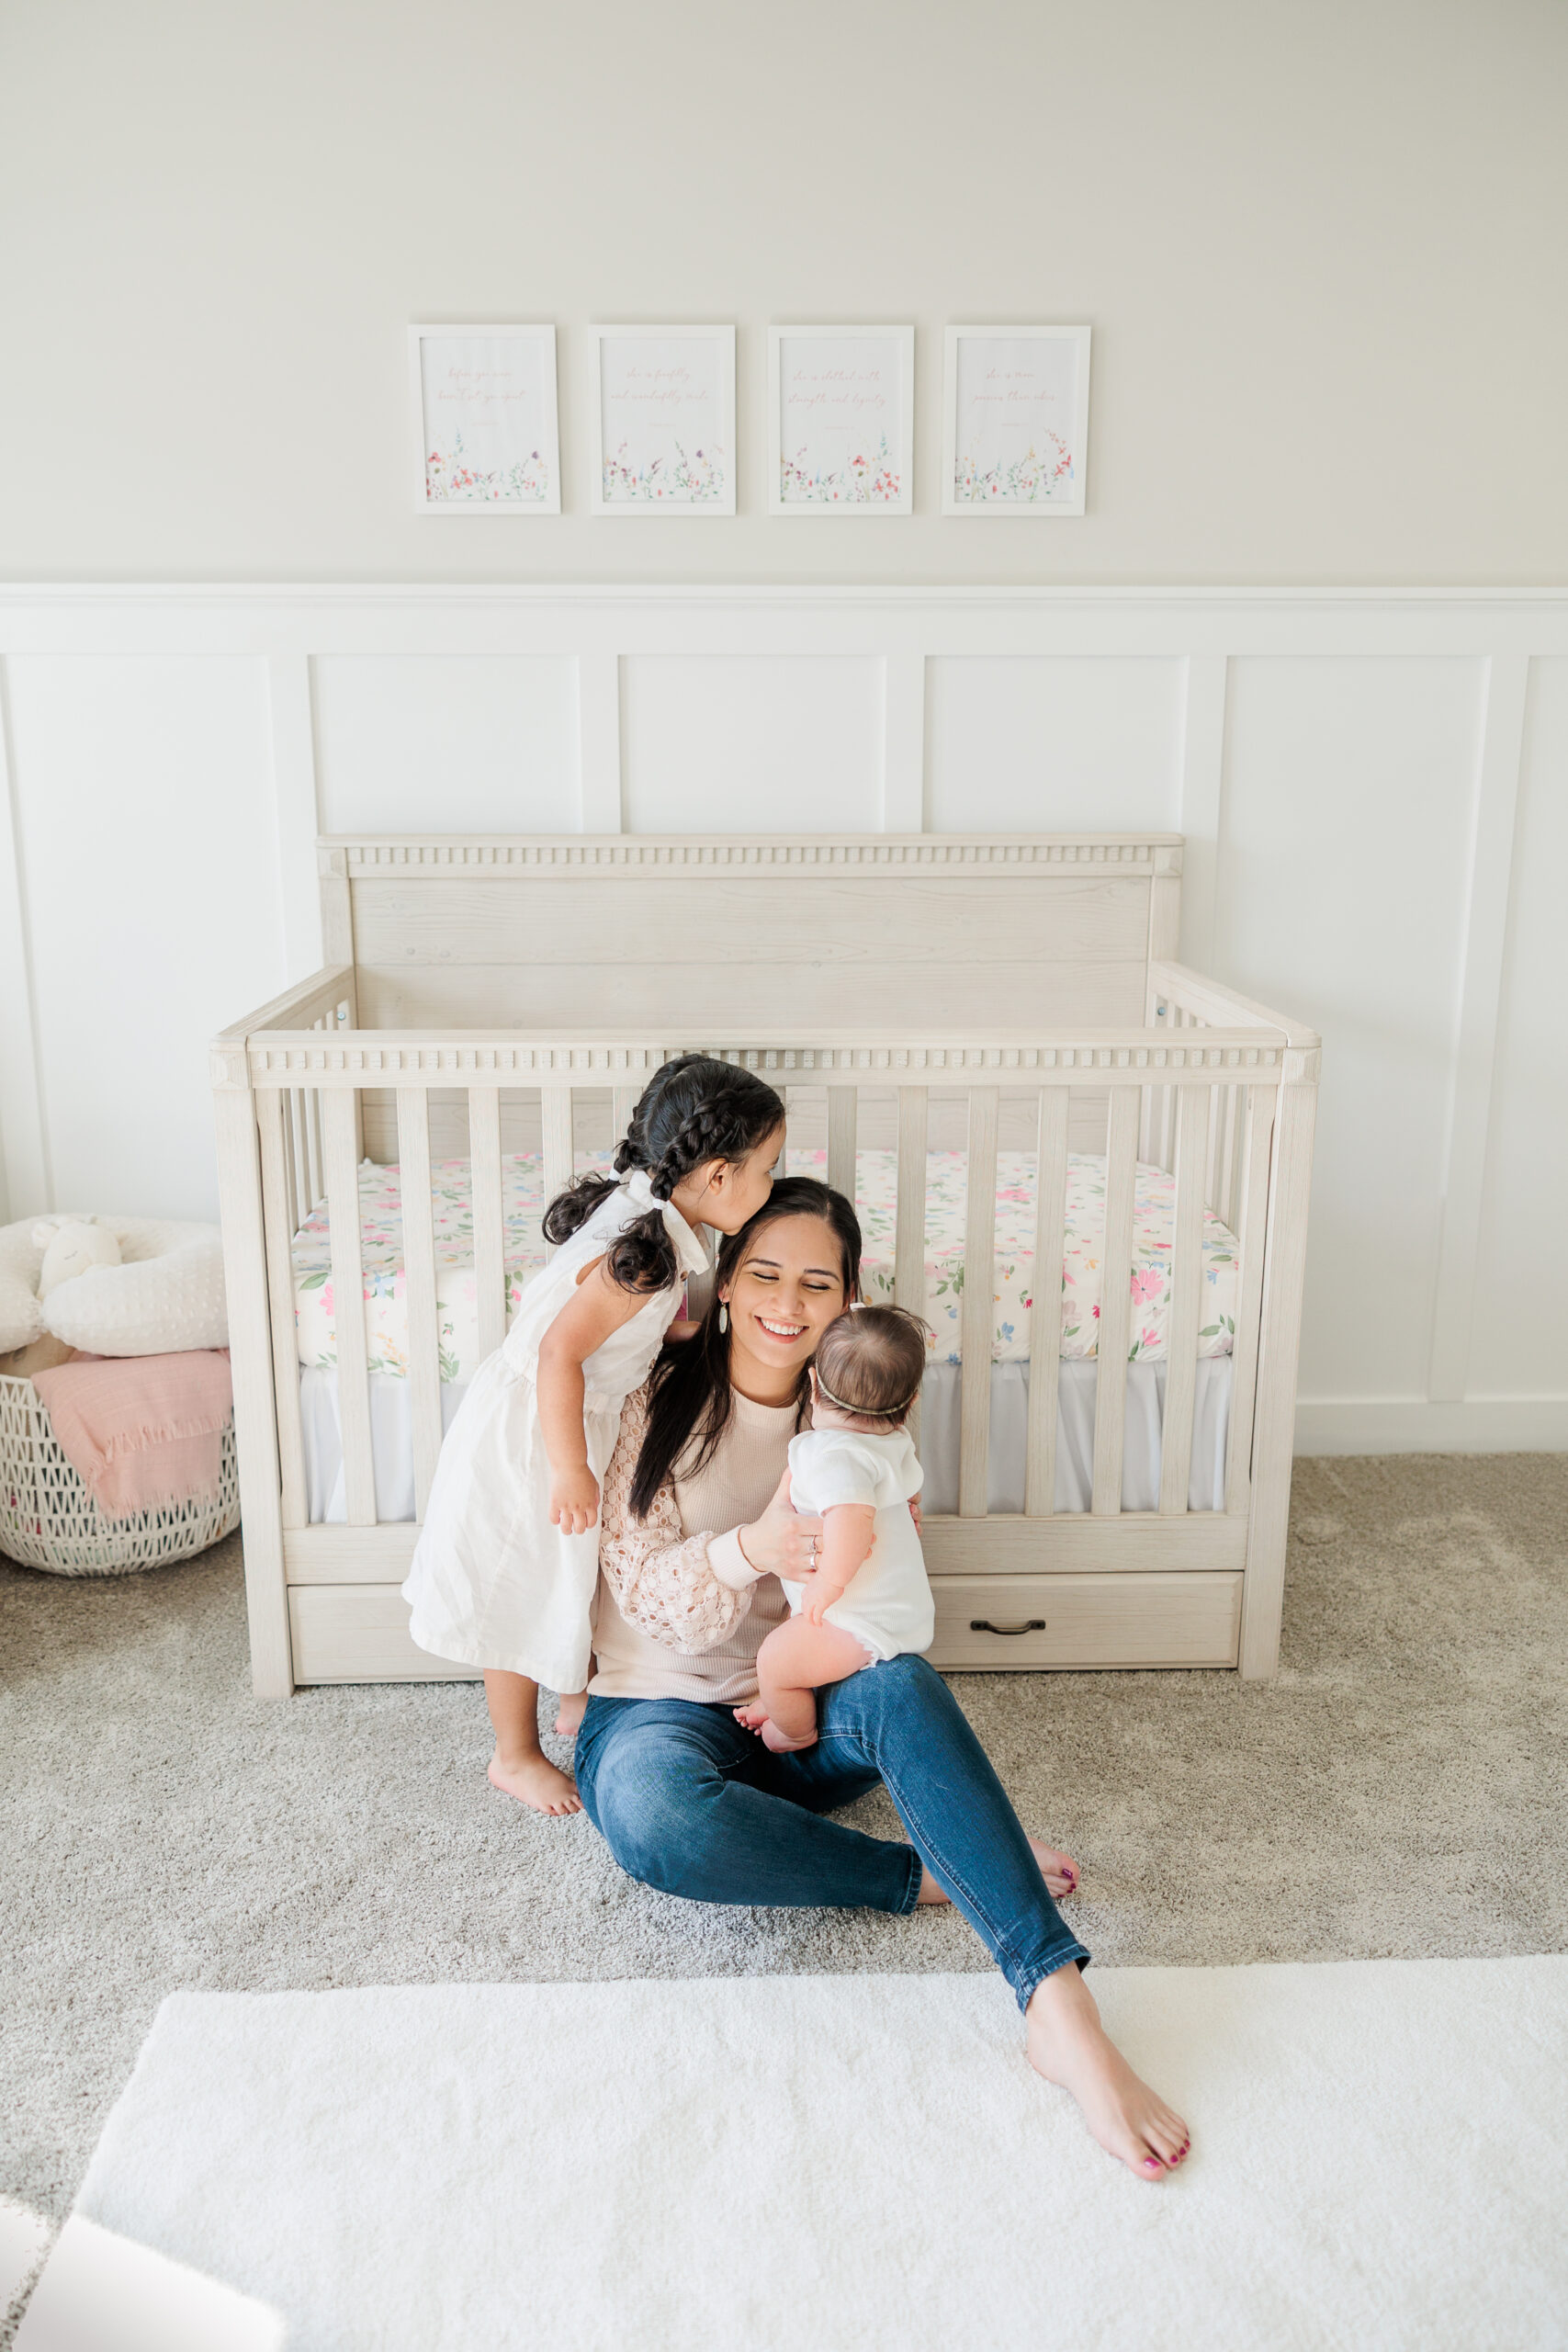 End of the Year: Christina Tundo Photography shares her 2023 Wrap-Up as a lifestyle Maryland and DMV family photographer. 